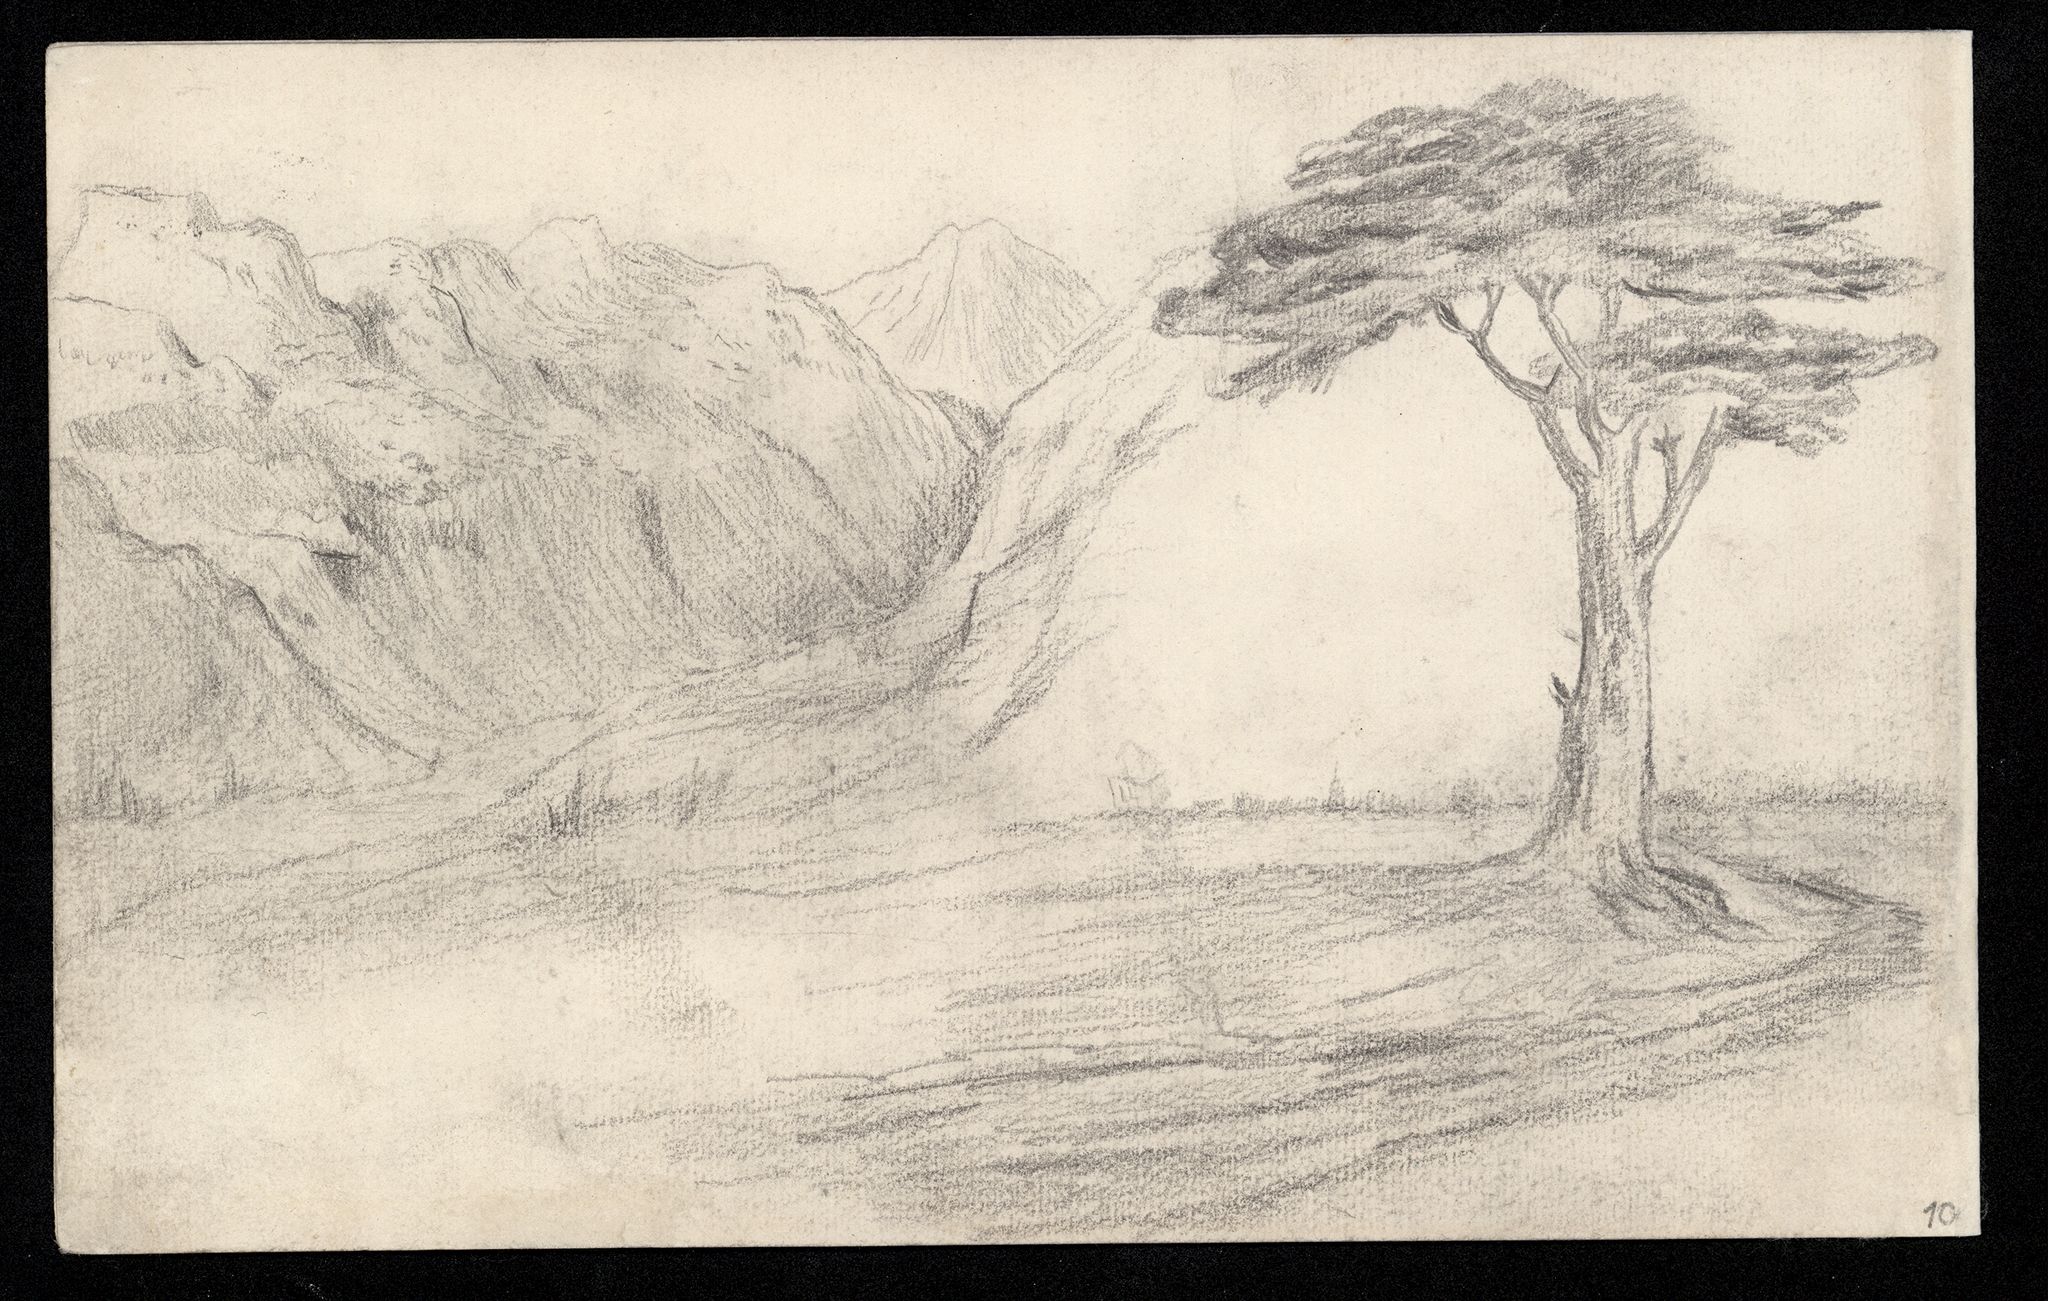 Image for: Drawings of Mountain and Pine Tree